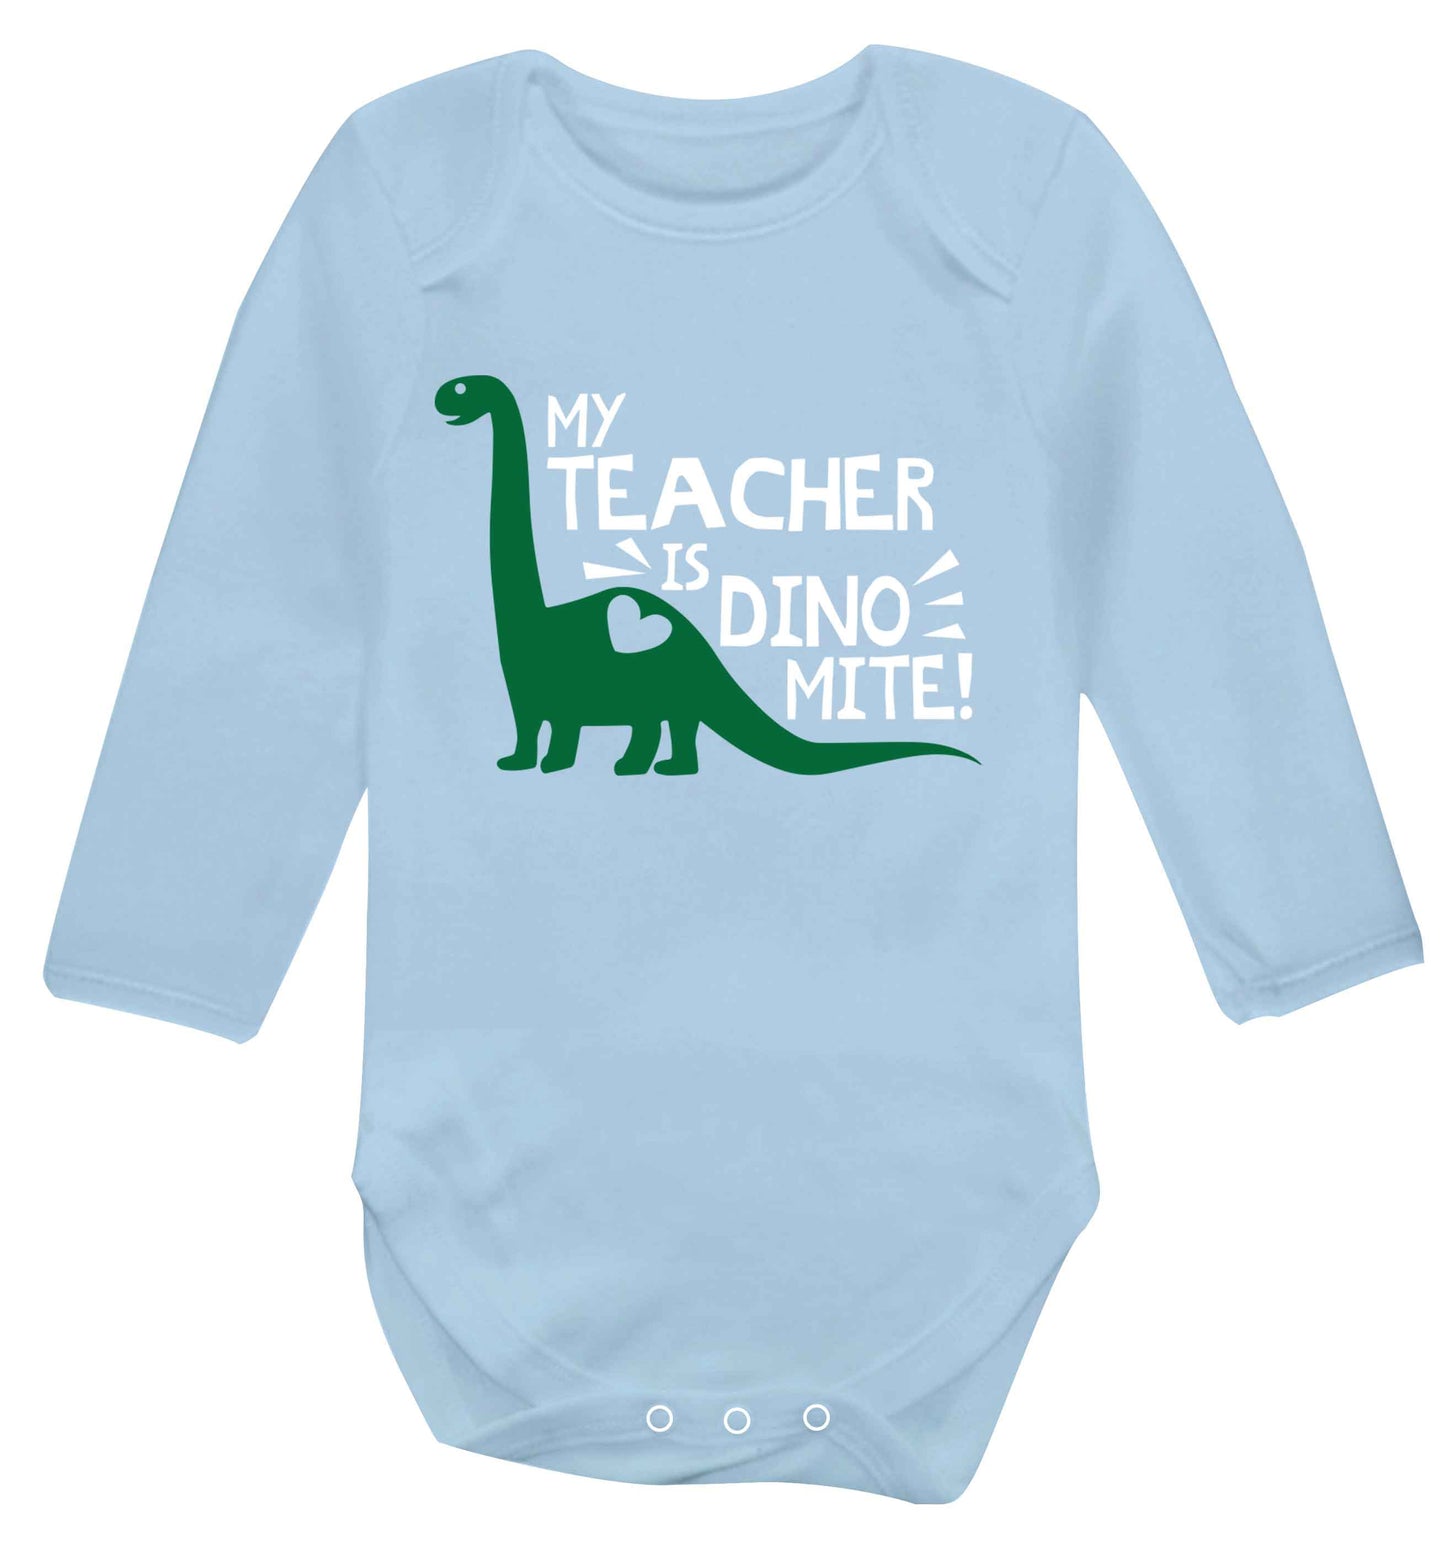 My teacher is dinomite! Baby Vest long sleeved pale blue 6-12 months